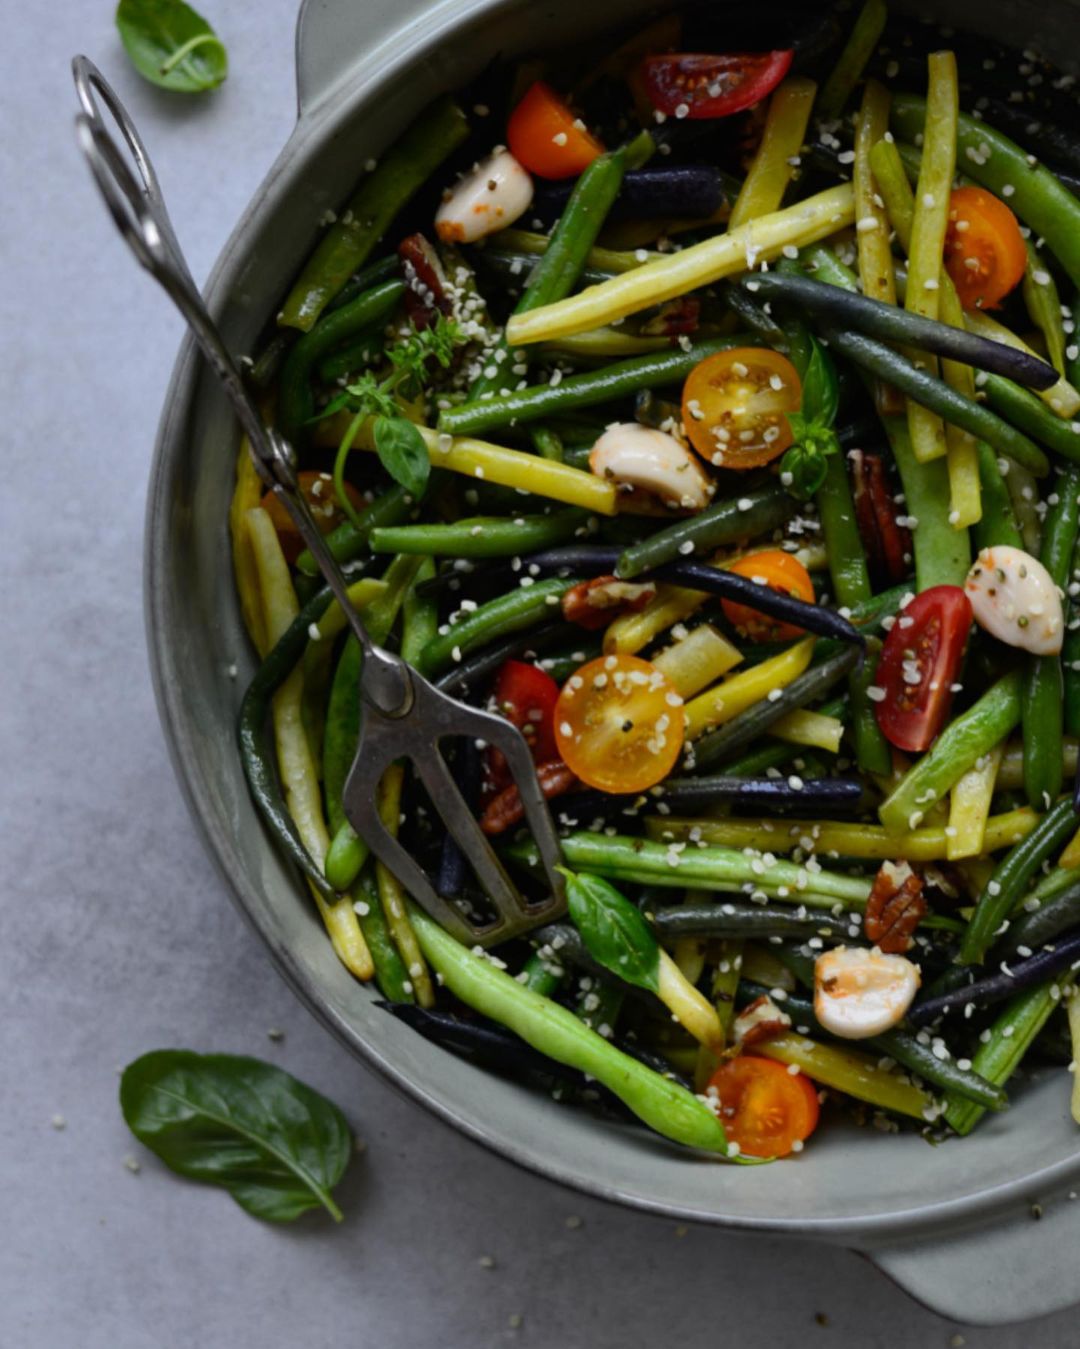 Colourful French Beans-Pecans Salad with Cherry Tomatoes,basil, Antipasti Garlic & Hemp Seeds